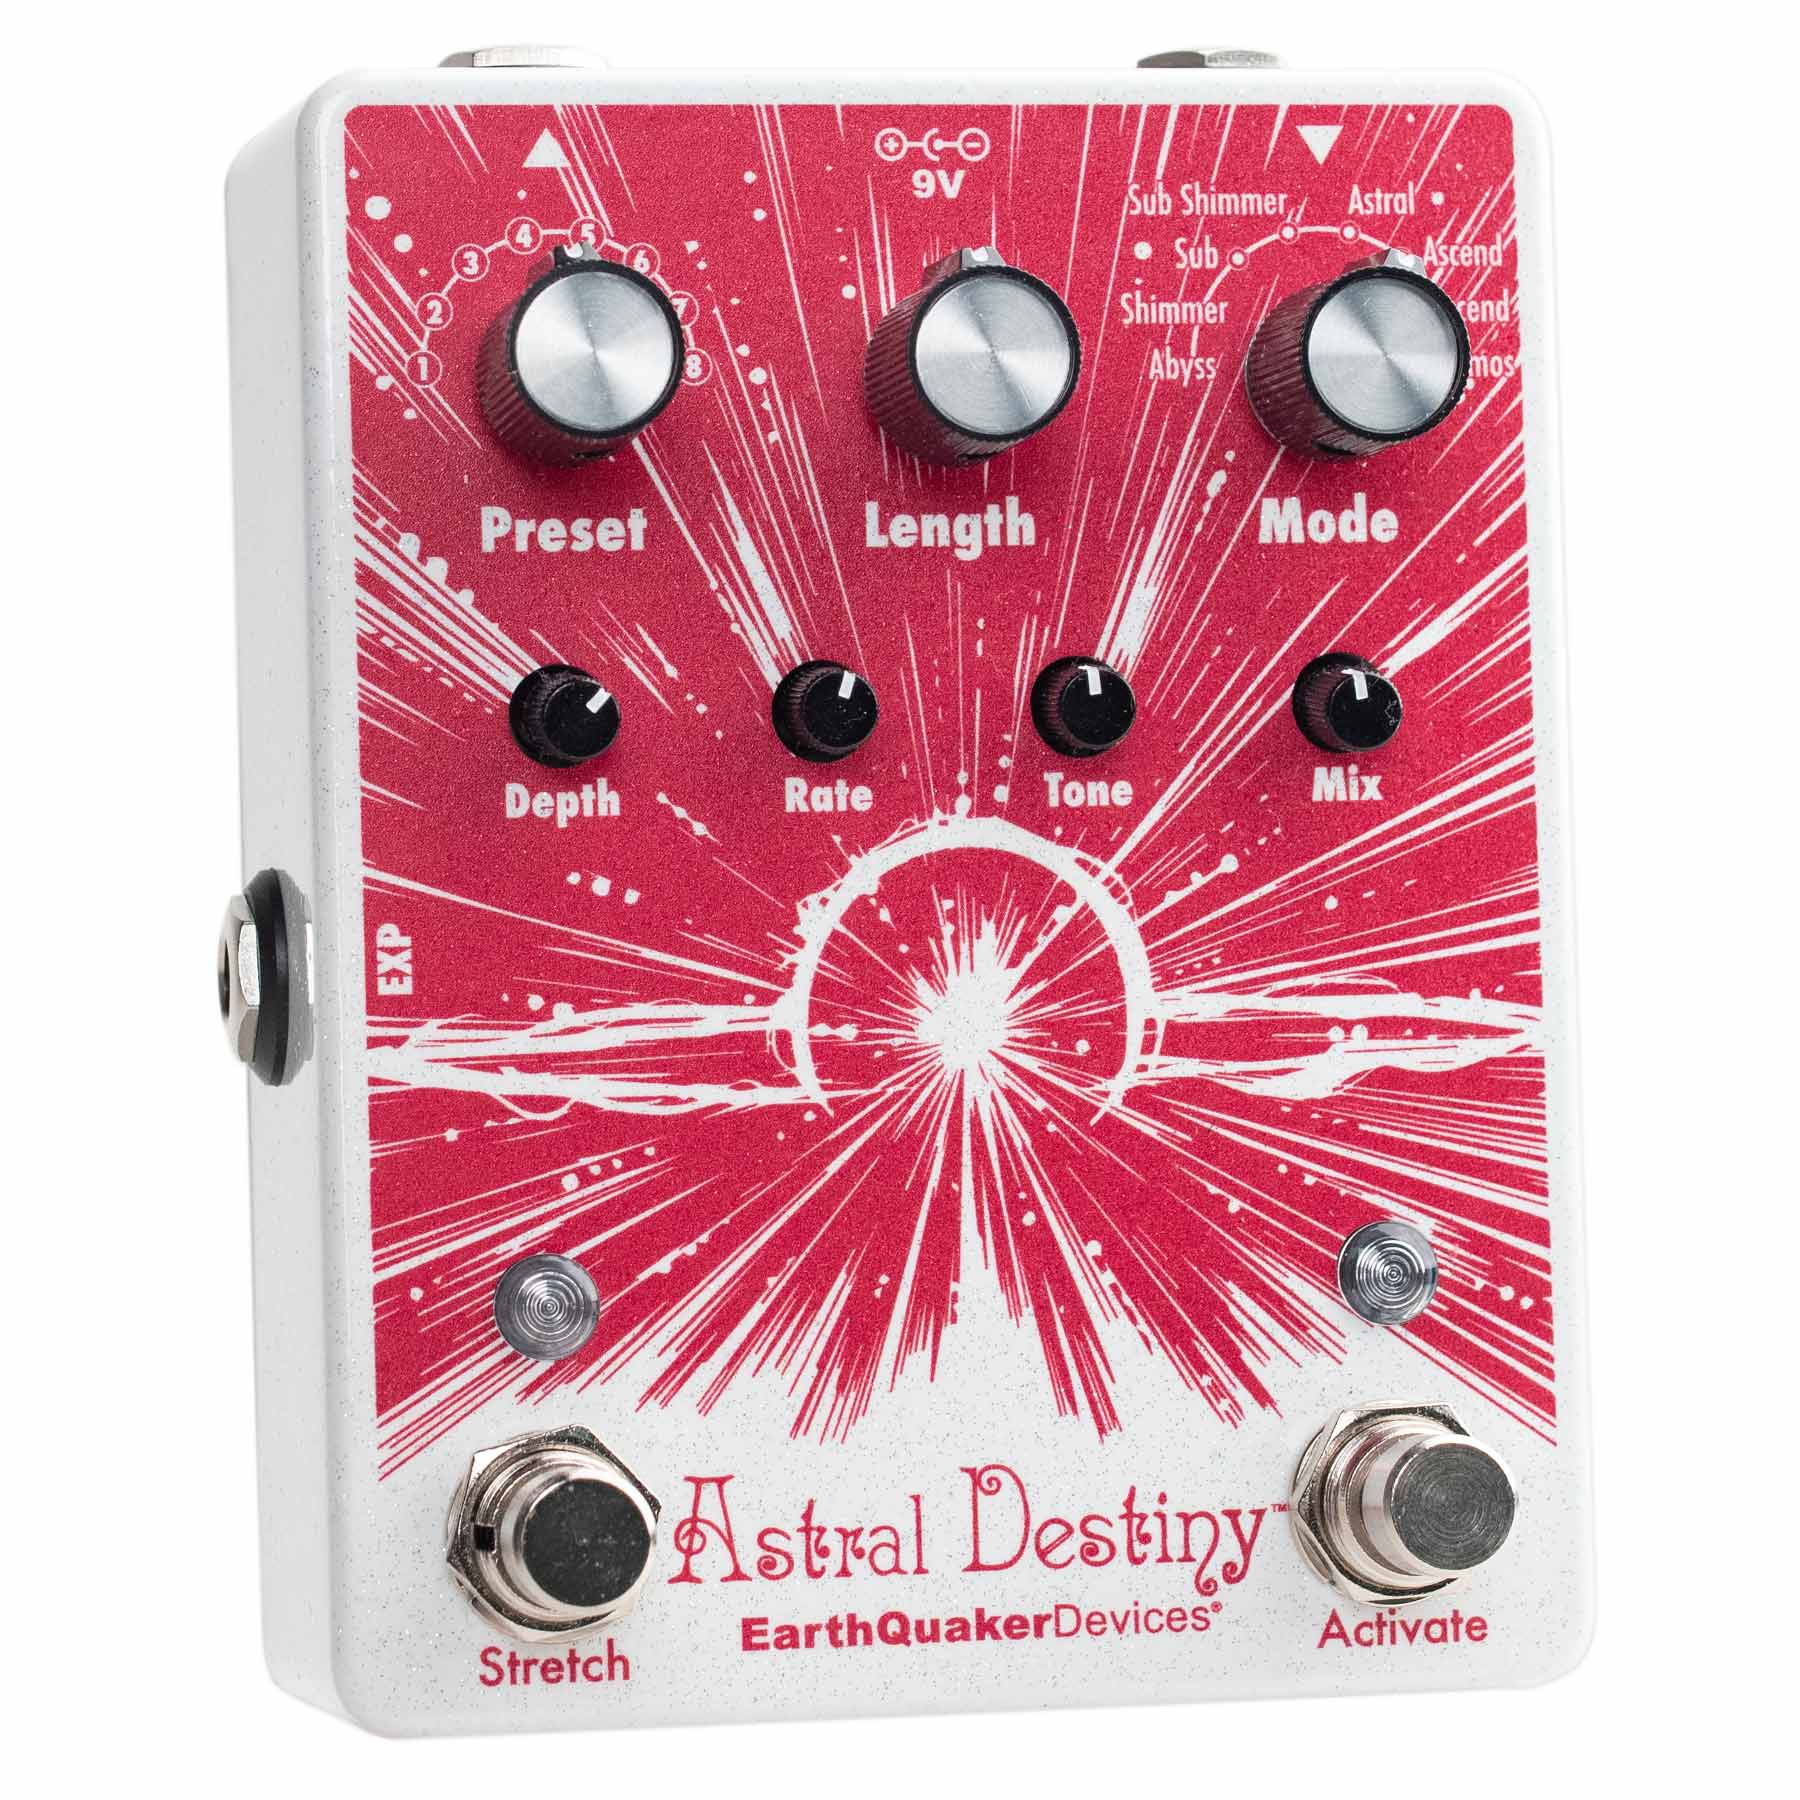 EARTHQUAKER DEVICES ASTRAL DESTINY OCTAL OCTAVE REVERBERATION ODYSSEY